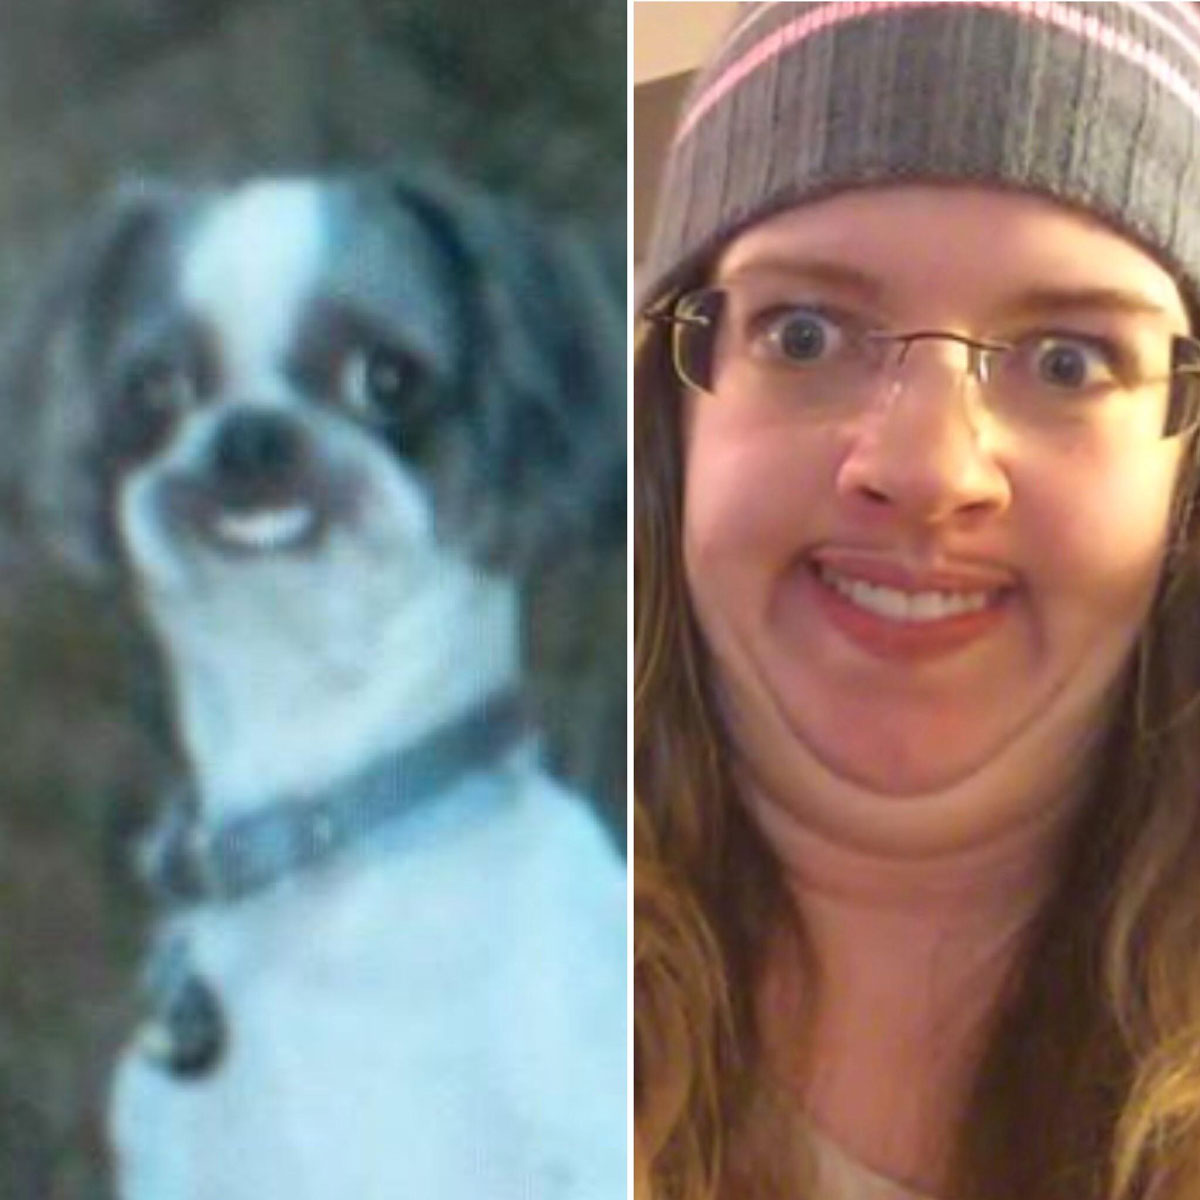 Just my impression of this dog